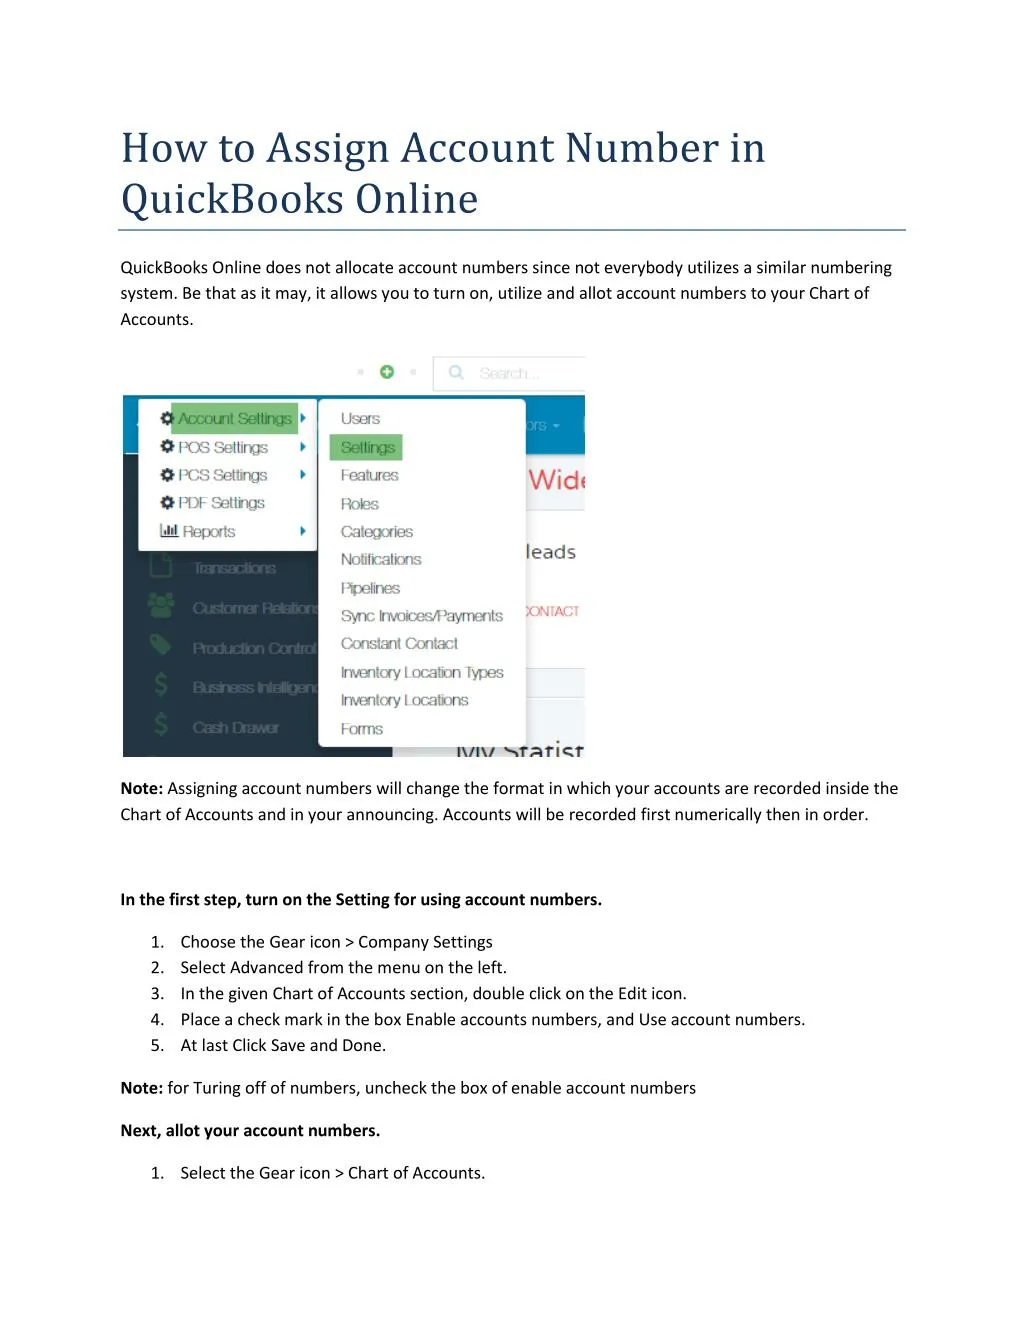 how to assign account number in quickbooks online